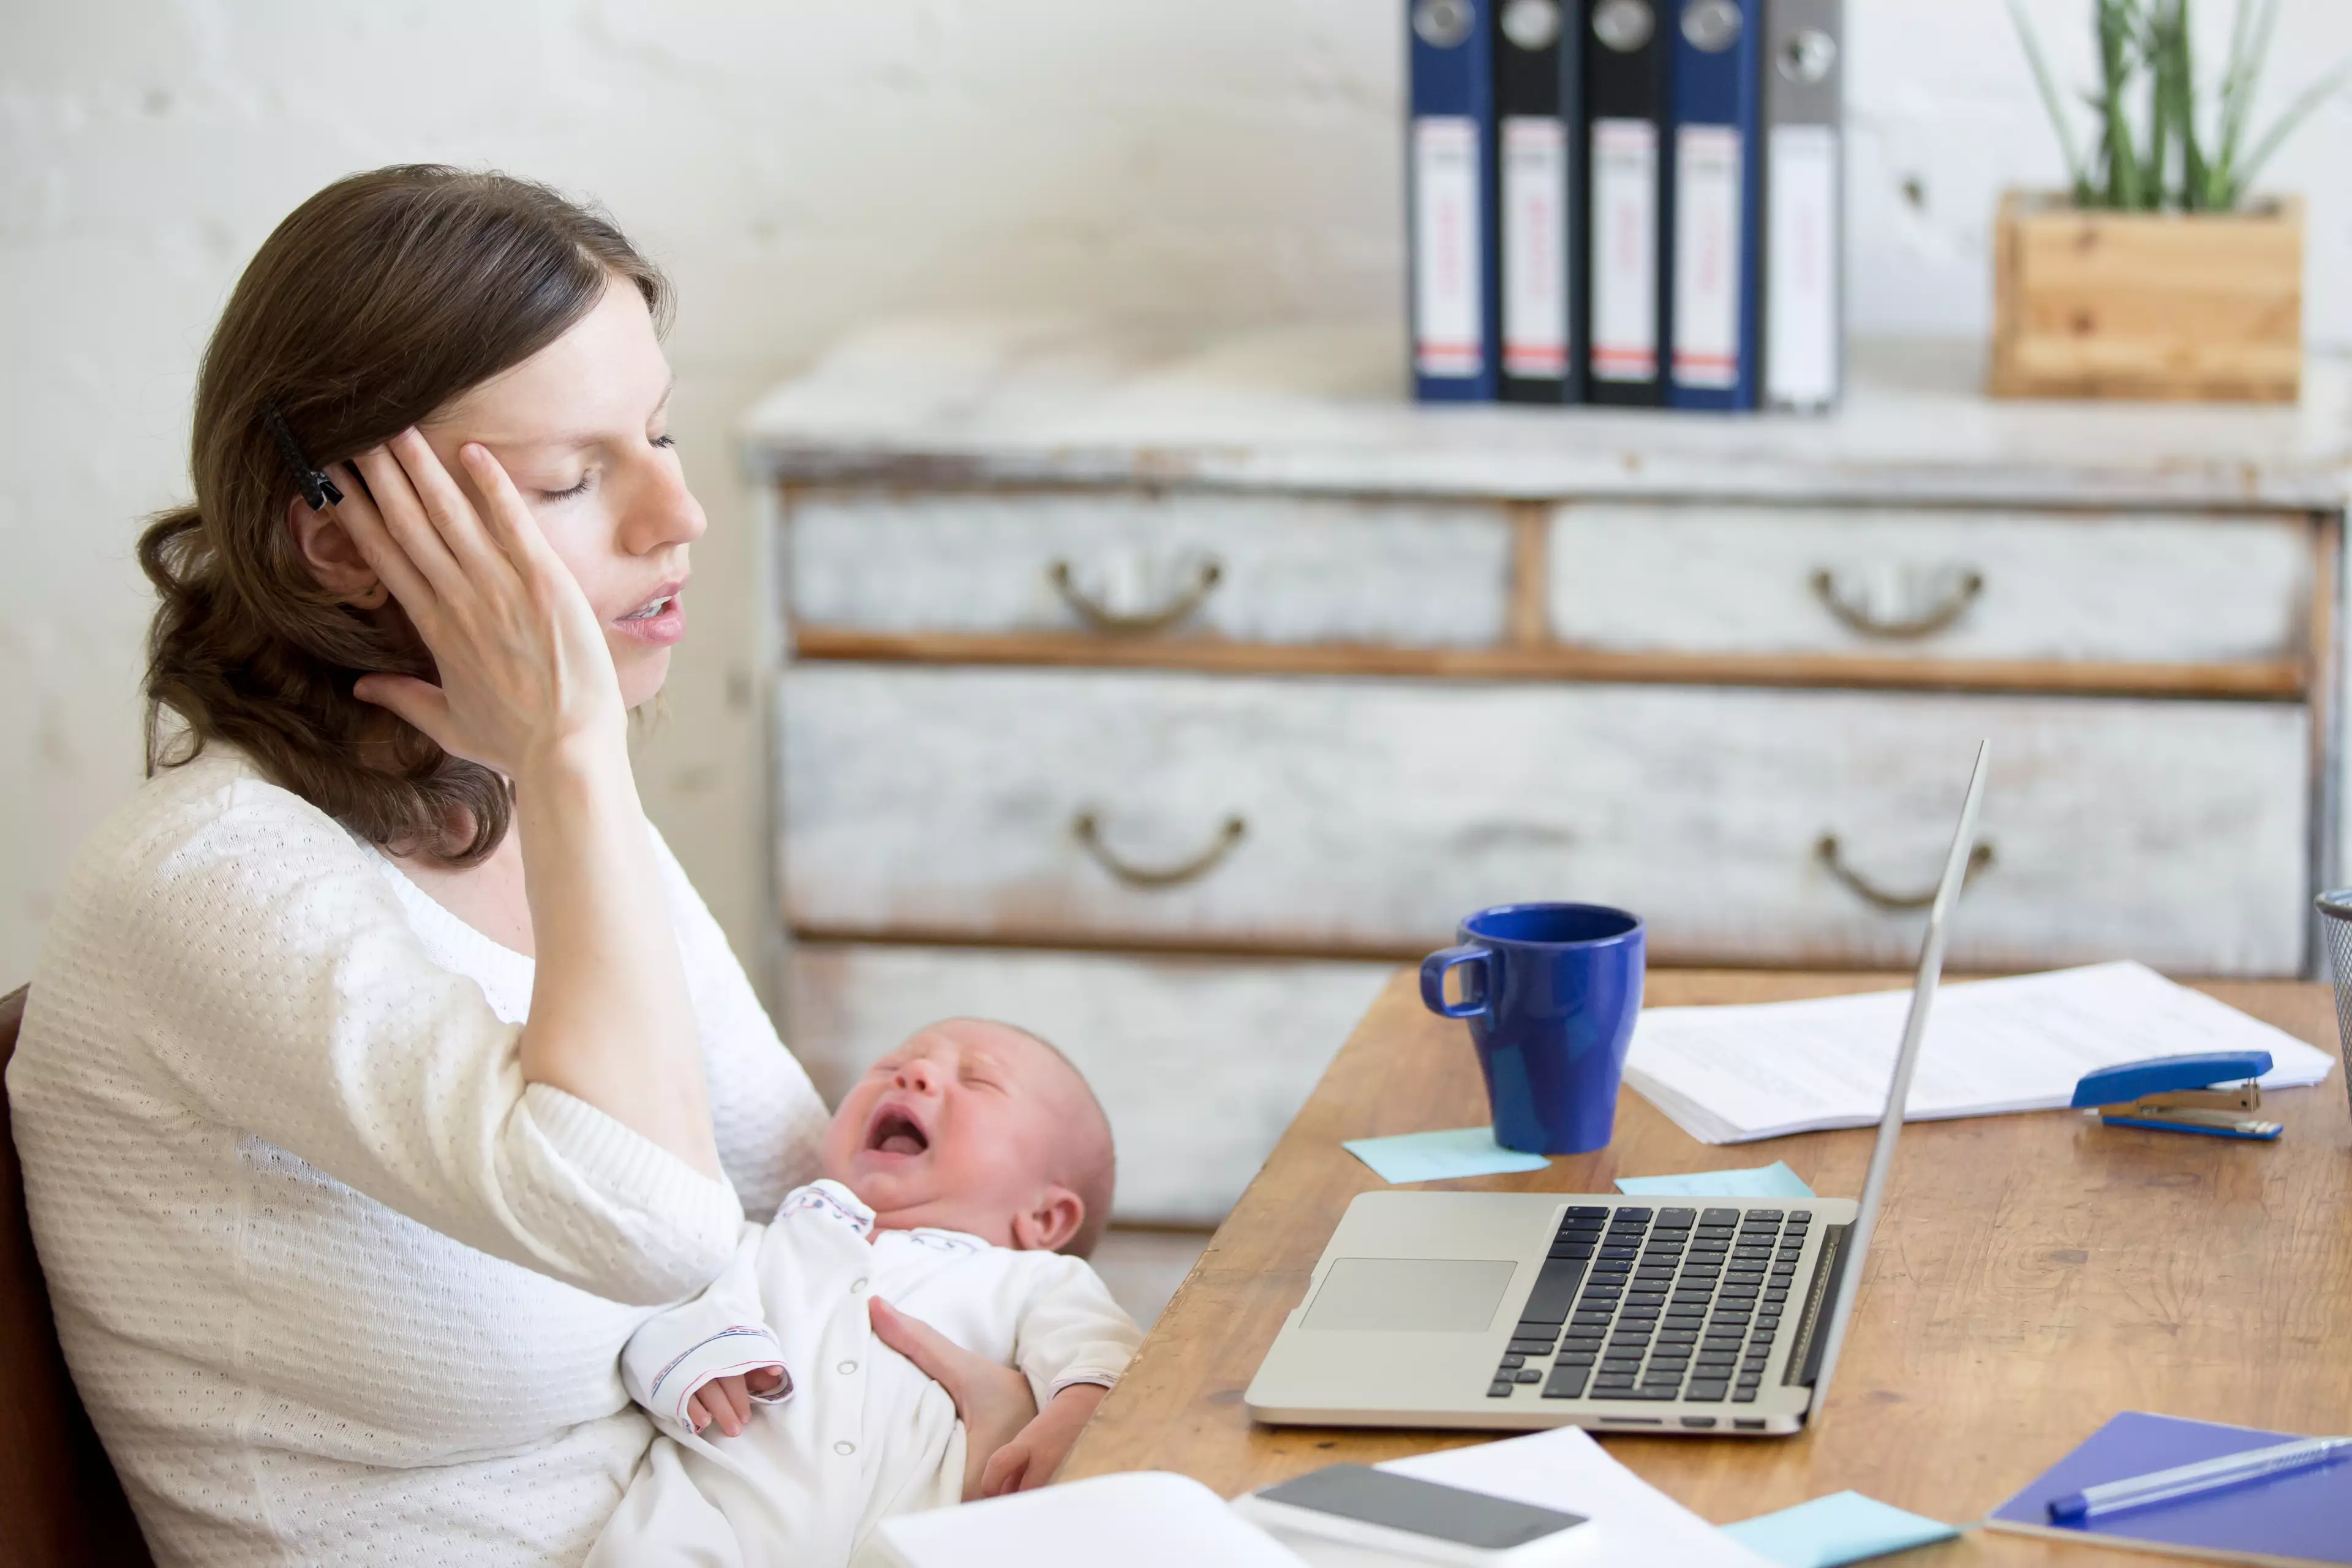 Mothers say juggling childcare and home working is tiring (